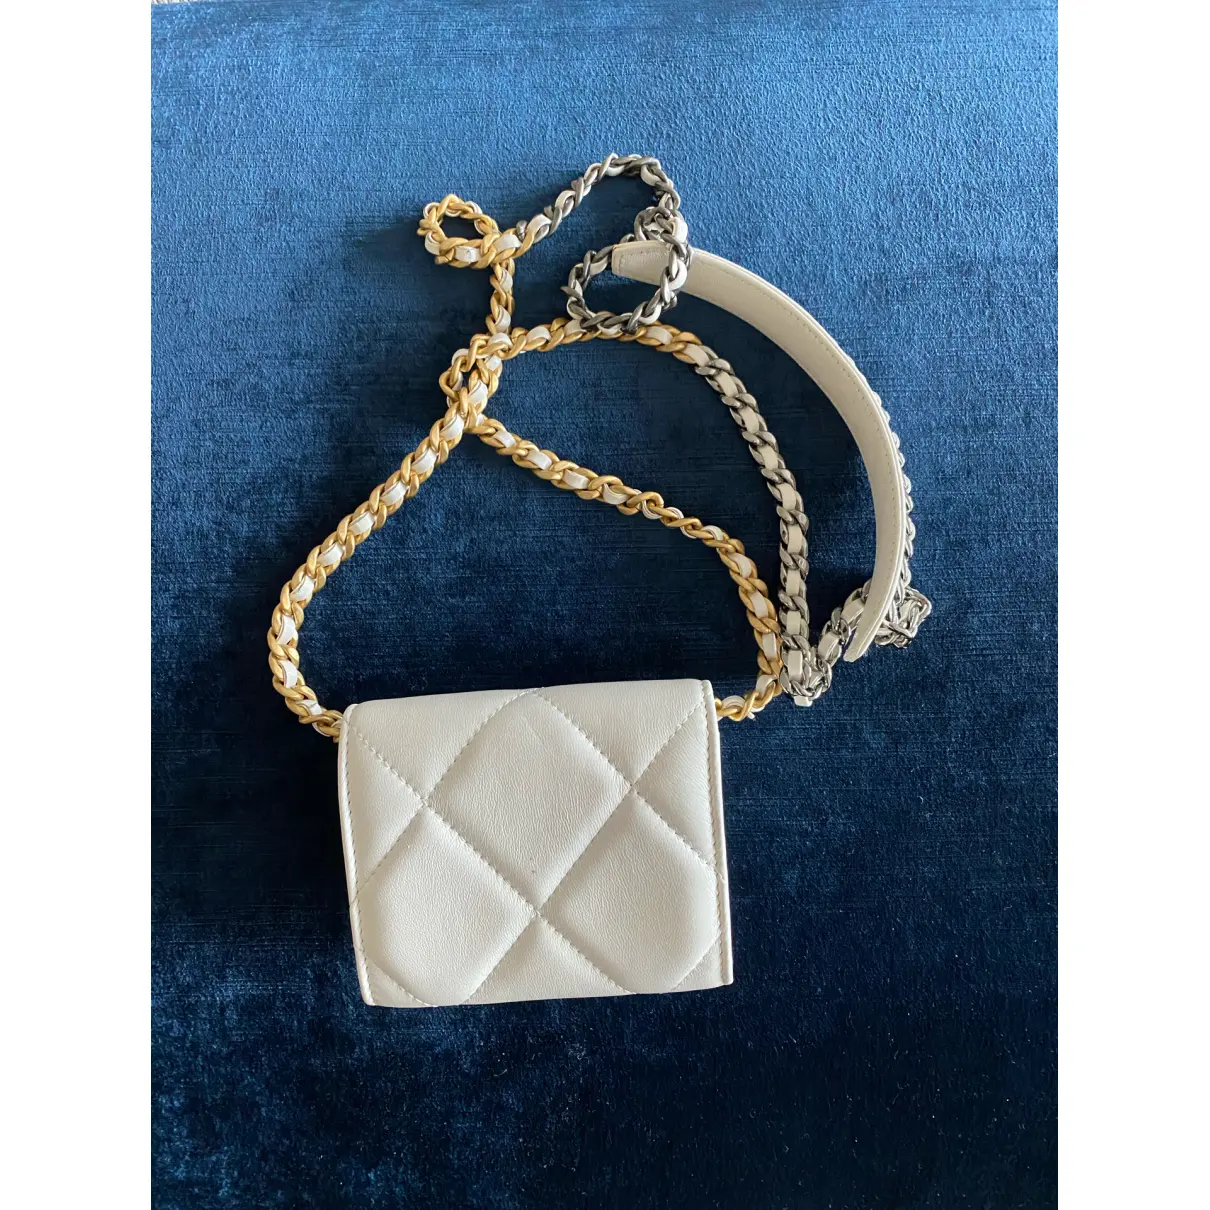 Buy Chanel Chanel 19 leather purse online